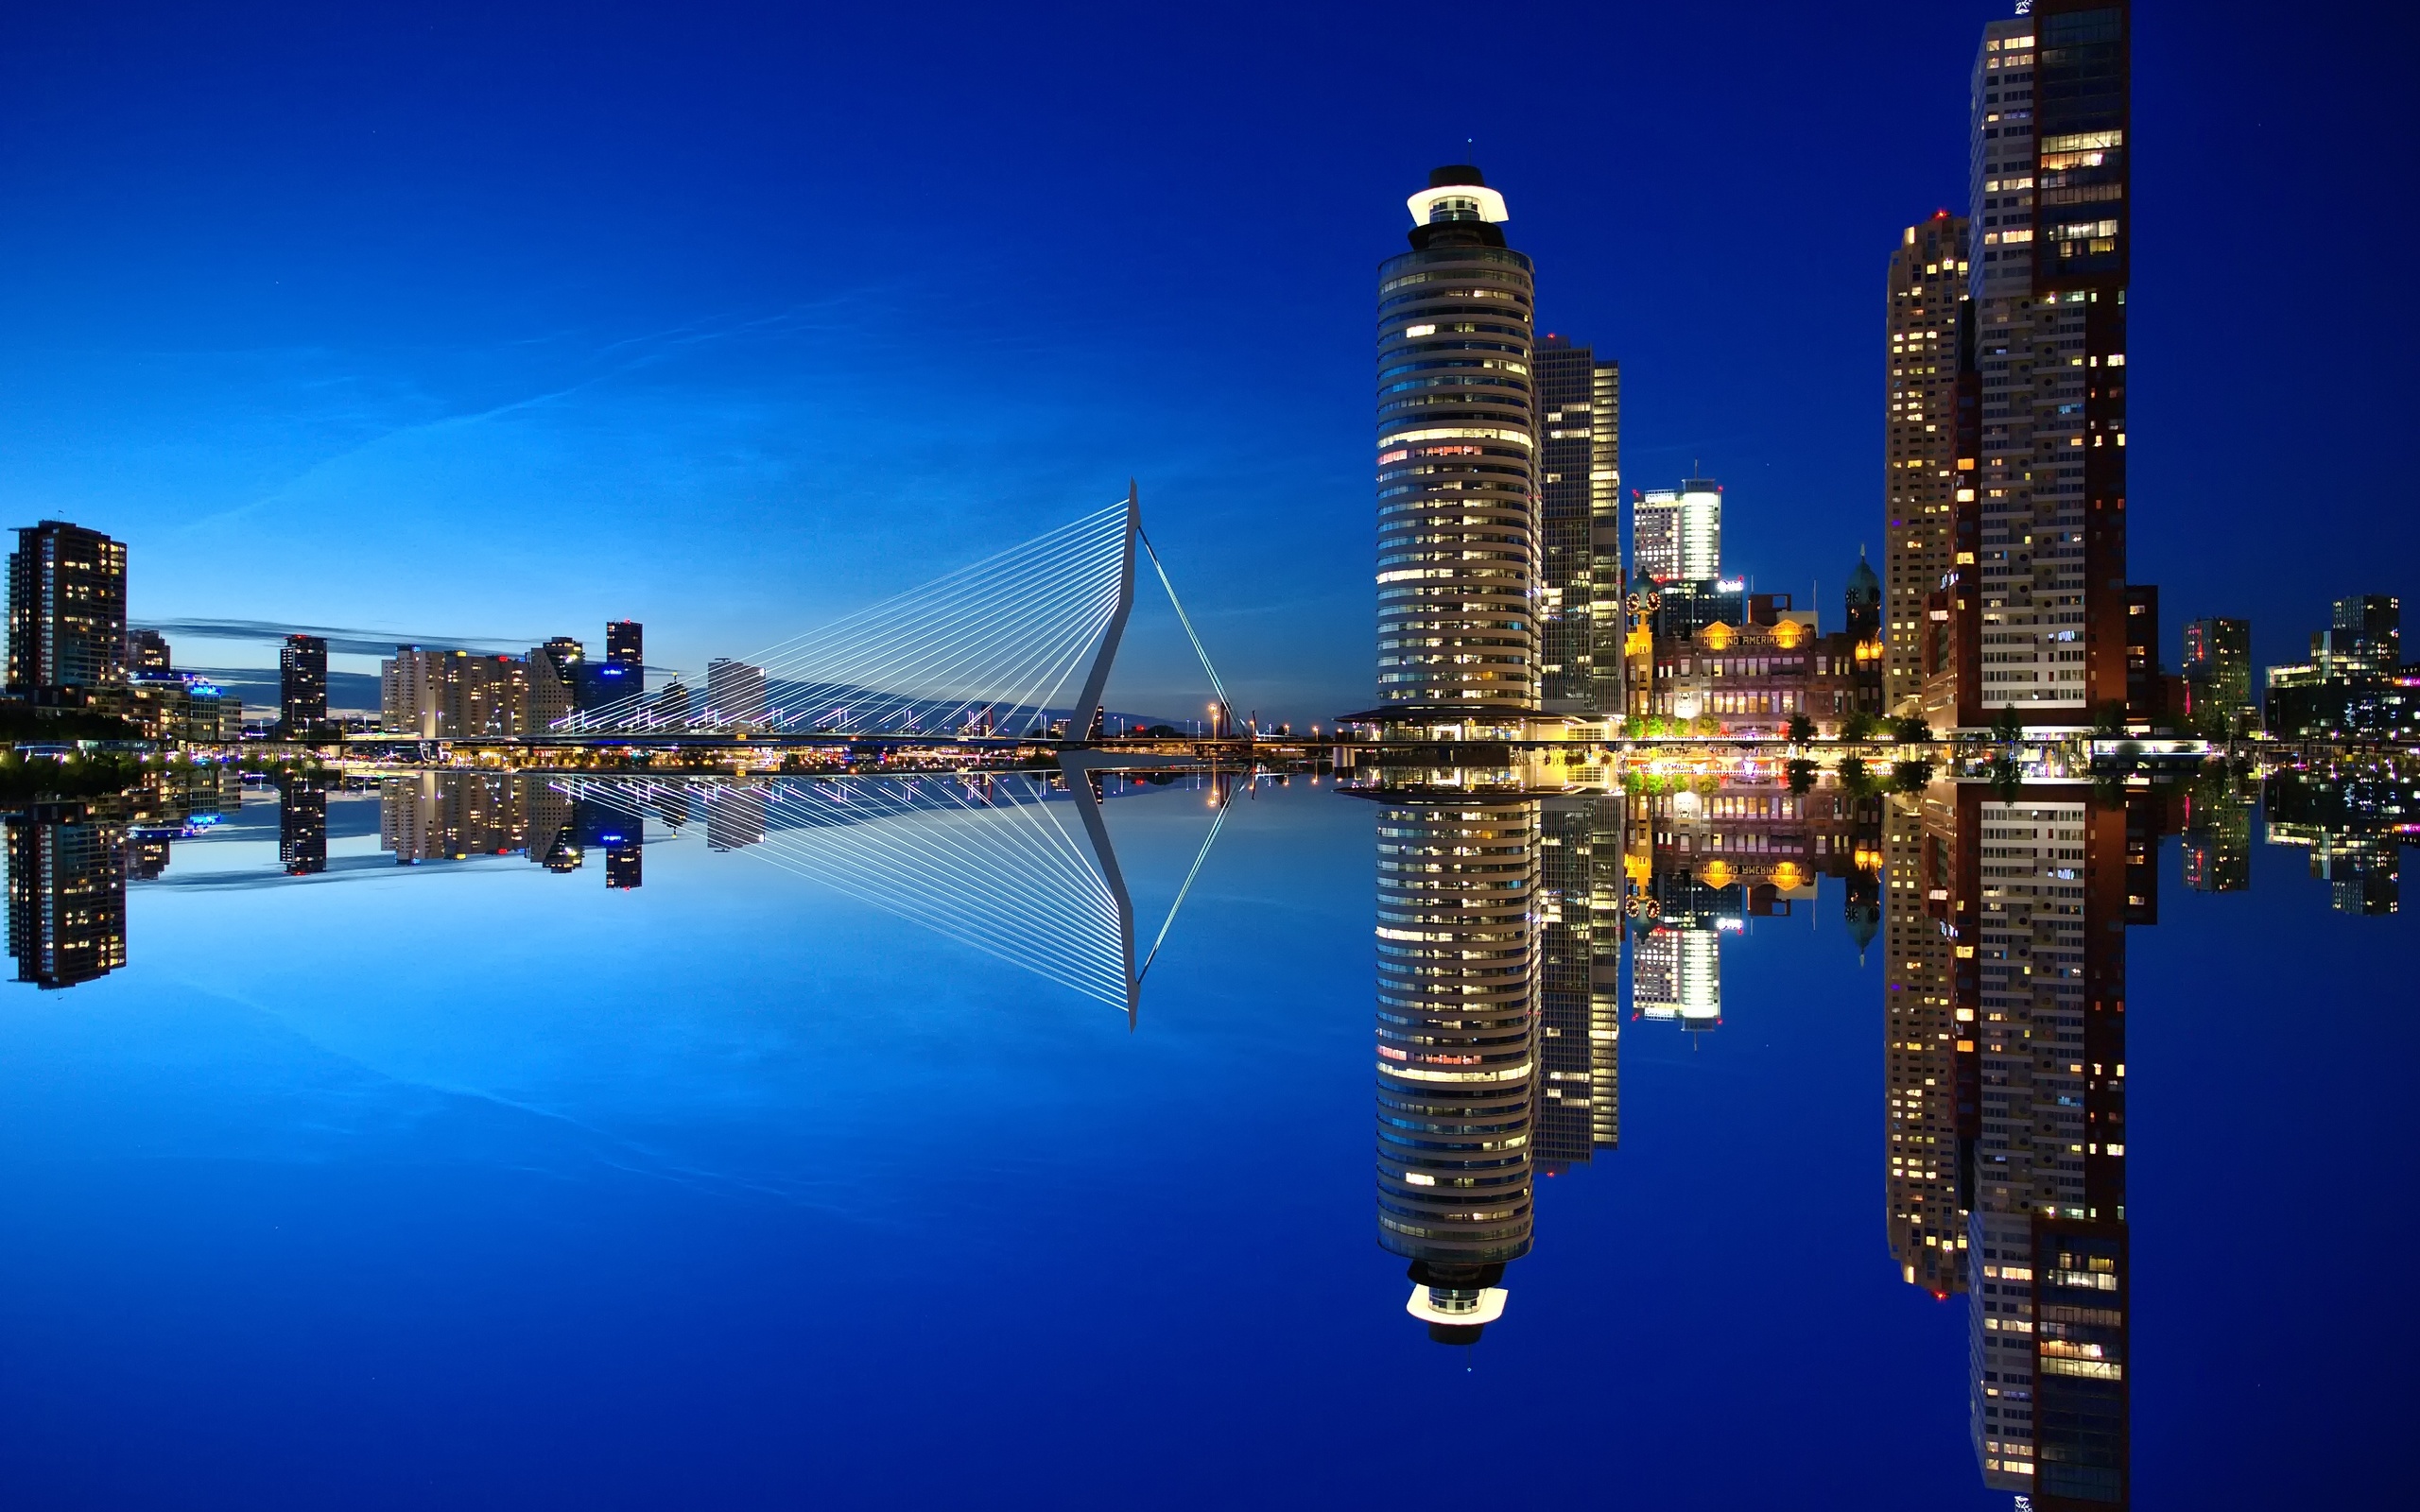 , , , , , , , , , , the sky, holland, night, rotterdam, water, the city, skyscrapers, architecture, port, netherlands